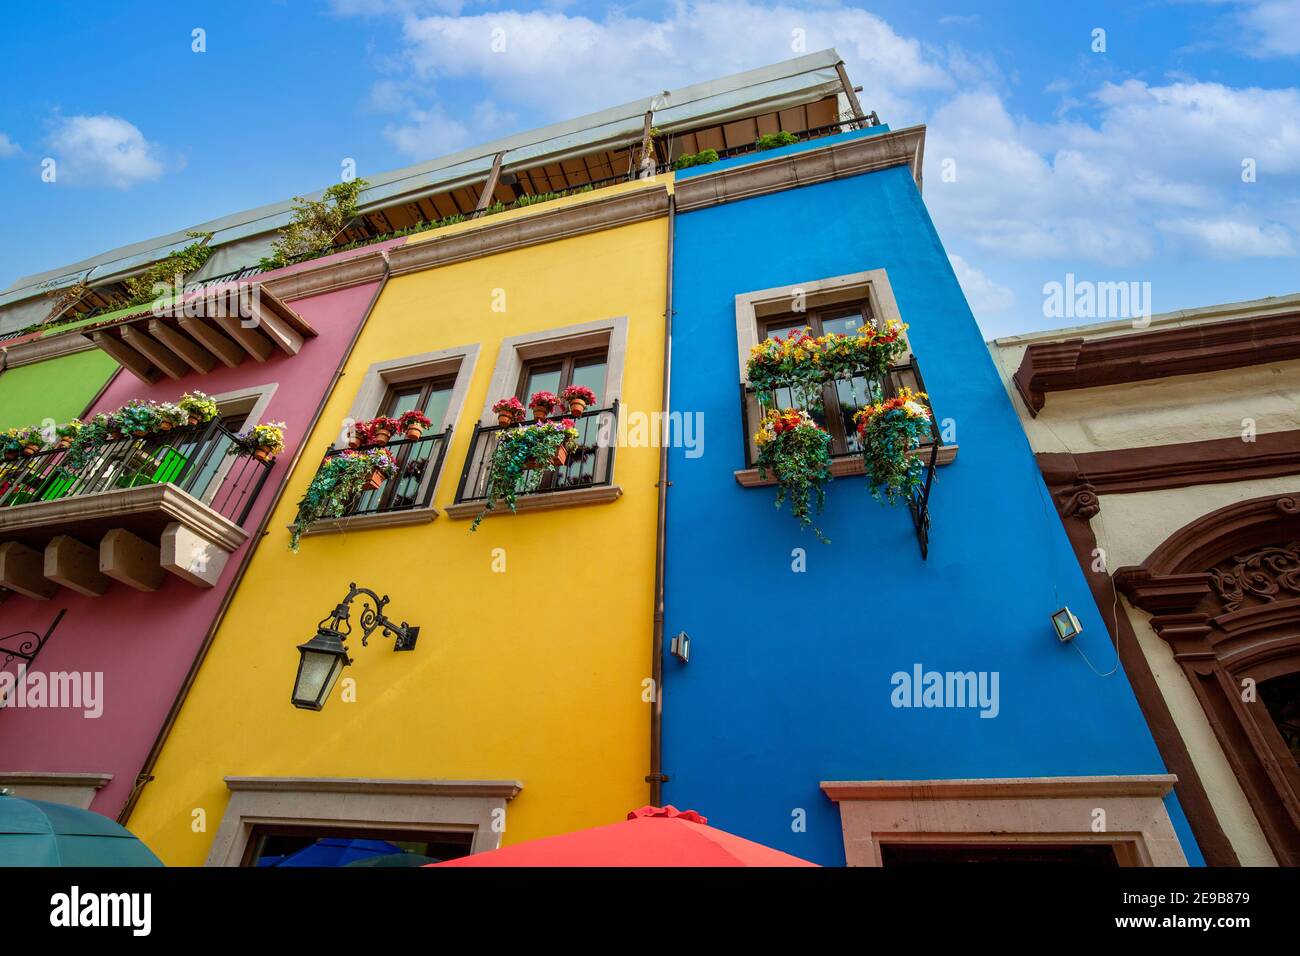 Mexico, Monterrey, colorful historic buildings in the center of the old city, Barrio Antiguo, a famous tourist attraction. Stock Photo